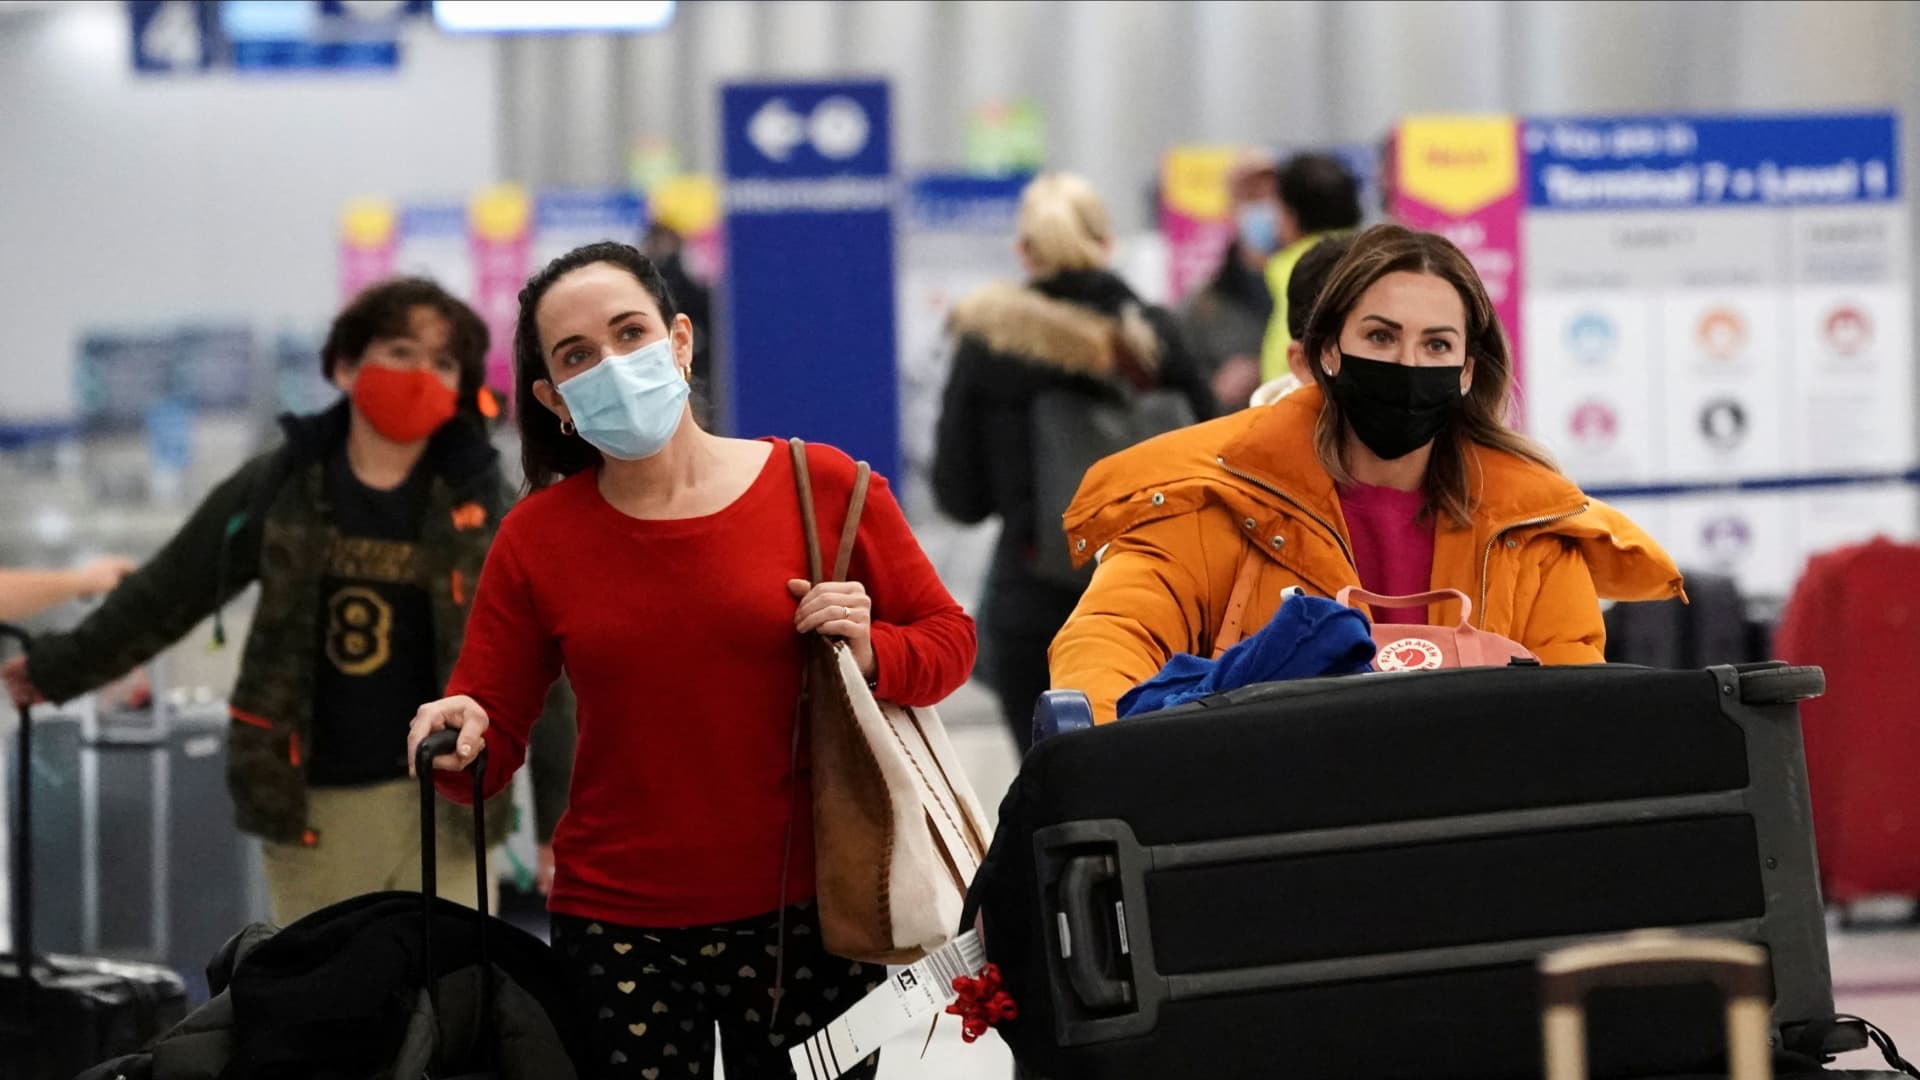 Travelers push their luggage past baggage claim inside the United Airlines terminal at Los Angeles International Airport (LAX) during the holiday season as the coronavirus disease (COVID-19) Omicron variant threatens to increase case numbers in Los Angeles, California, U.S. December 22, 2021.